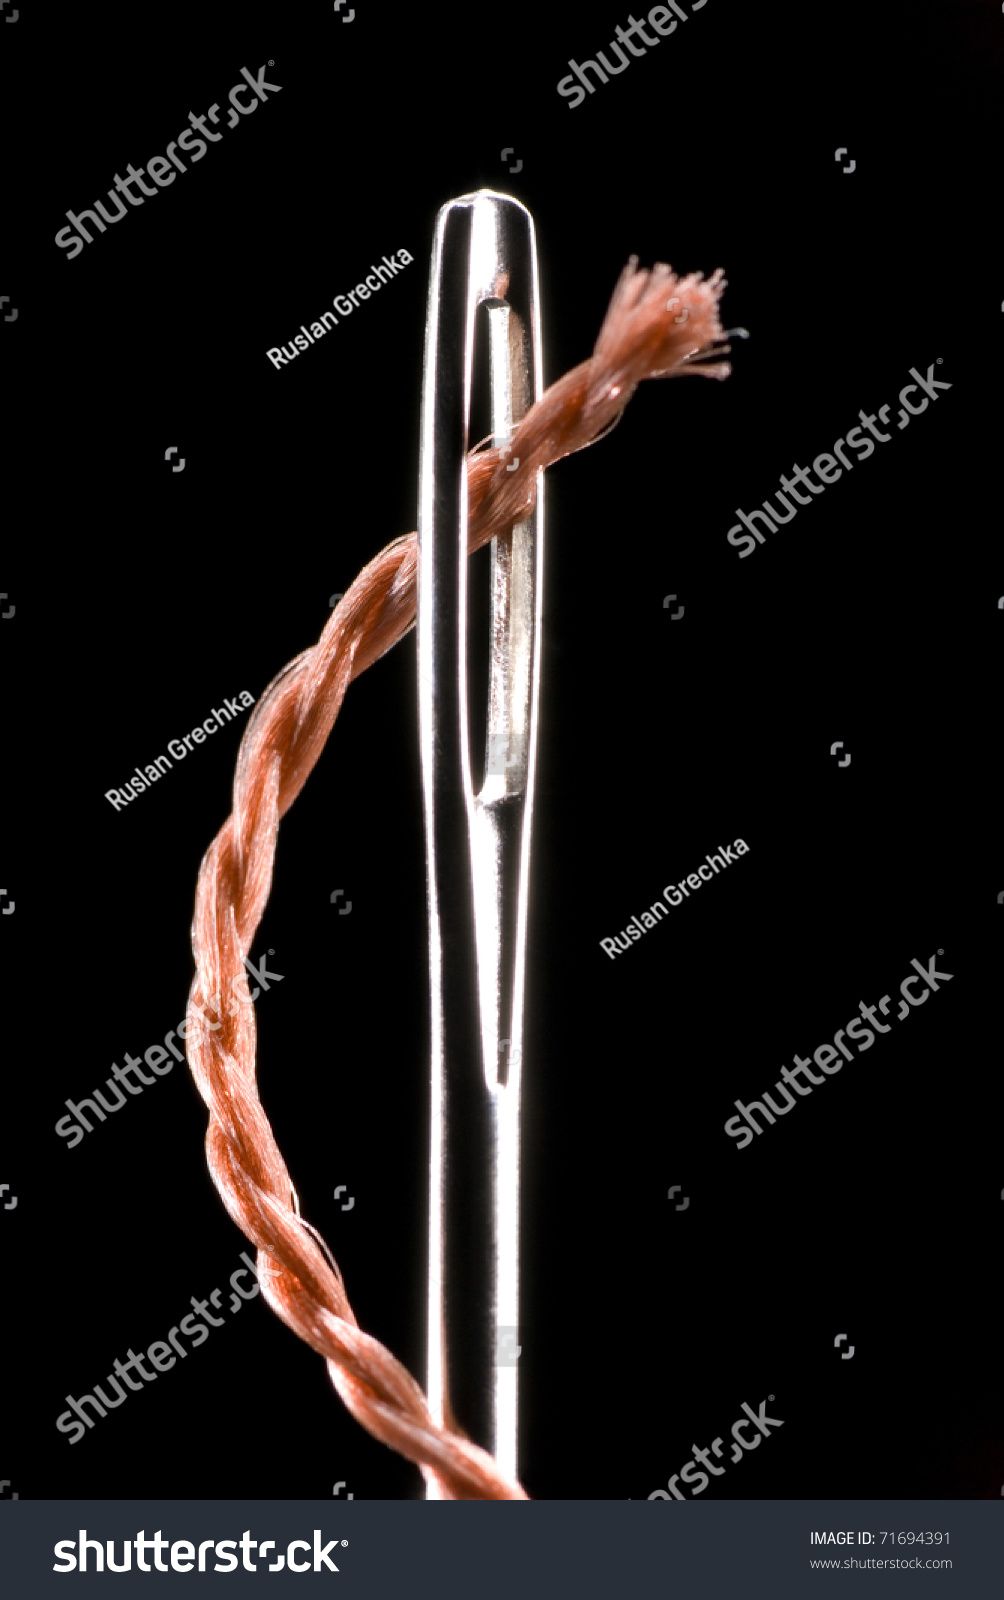 Metal needle and string. The string will penetrate into a metal aperture. A black background. #71694391